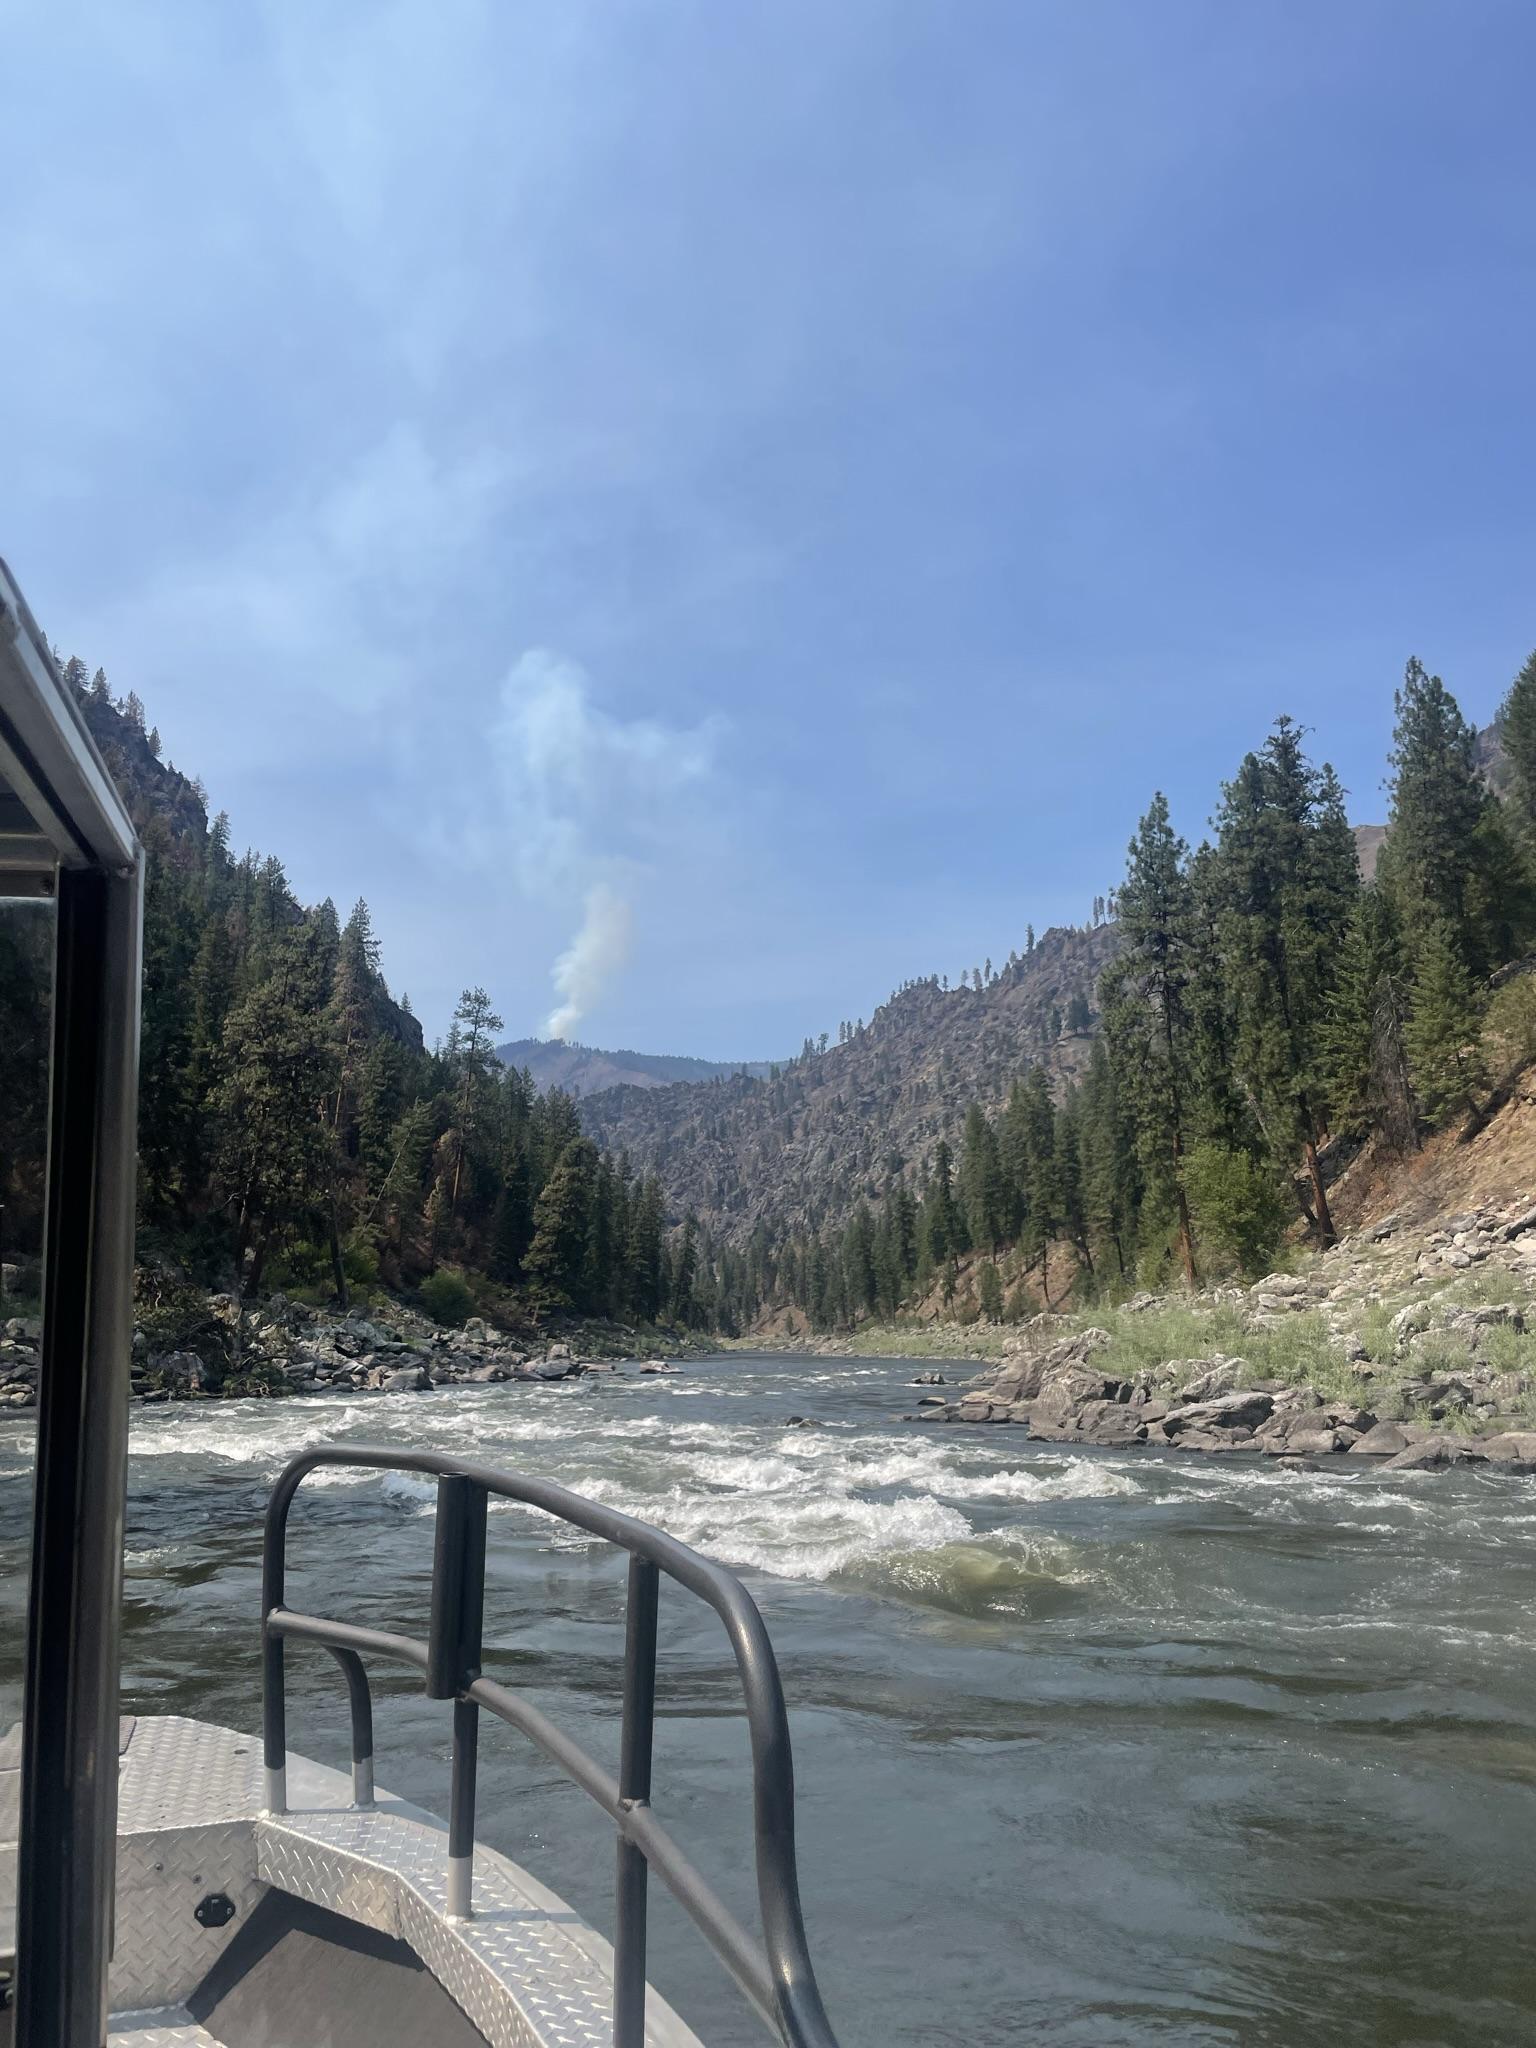 View of a smoke column in the distance from a boat traveling the Salmon River